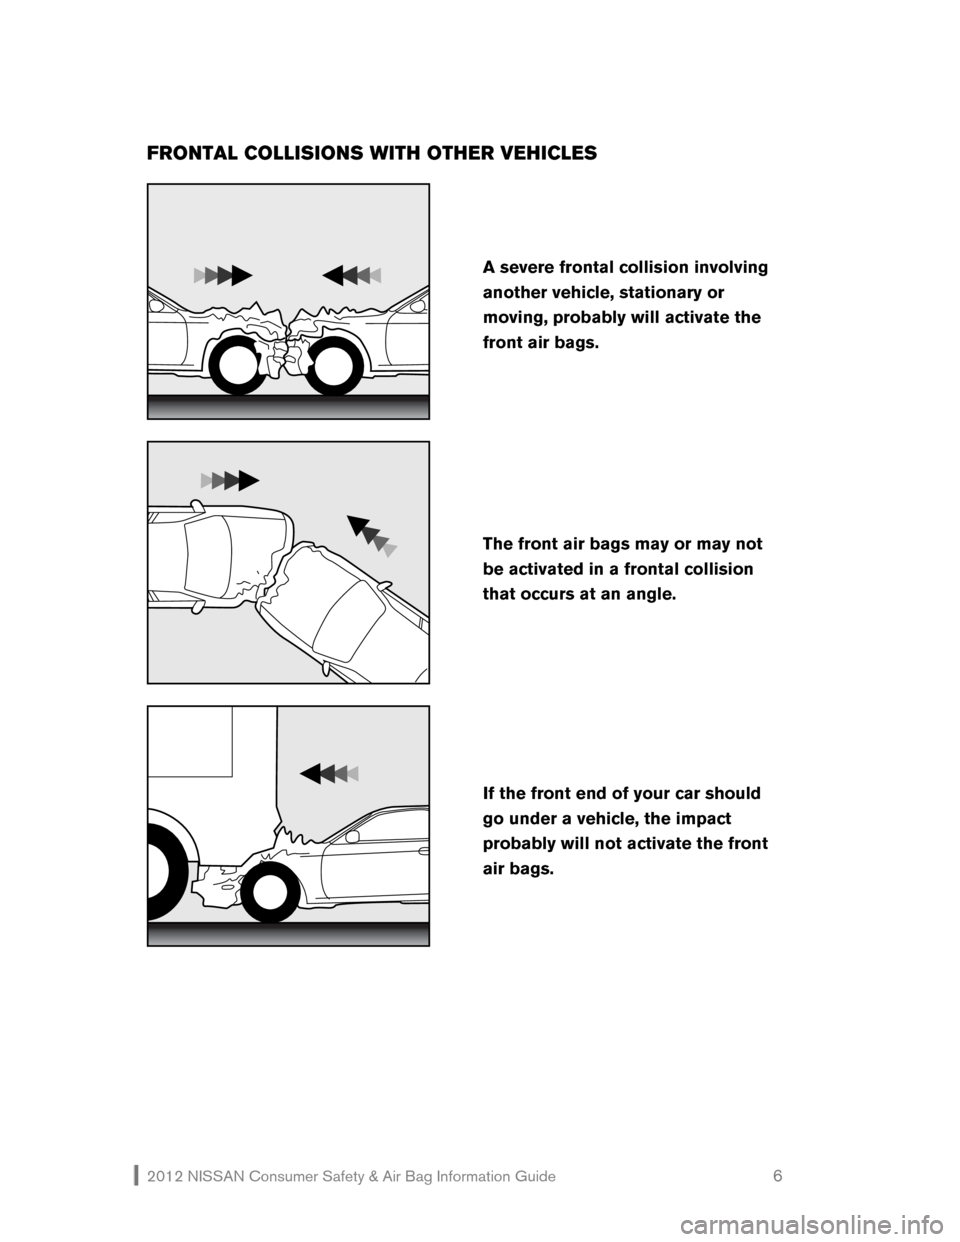 NISSAN ROGUE 2012 1.G Consumer Safety Air Bag Information Guide 2012 NISSAN Consumer Safety & Air Bag Information Guide                                                   6 
FRONTAL COLLISIONS WITH OTHER VEHICLES 
 
 
 
 
If the front end of your car should 
go und